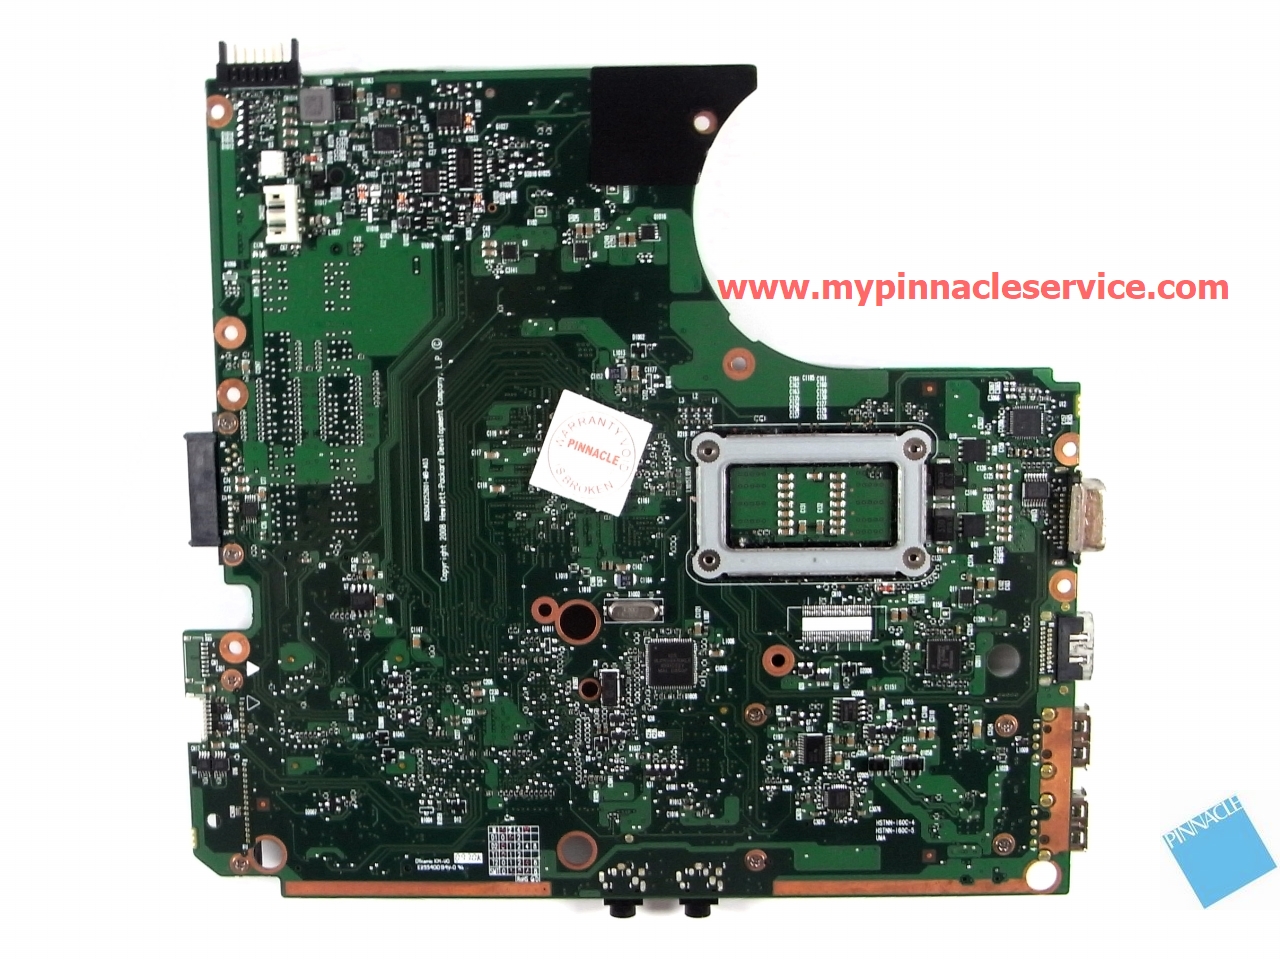 578179-001-motherboard-for-hp-comaq-4510s-4311s-4411s-4410s-6050a2252601-r0010757.jpg